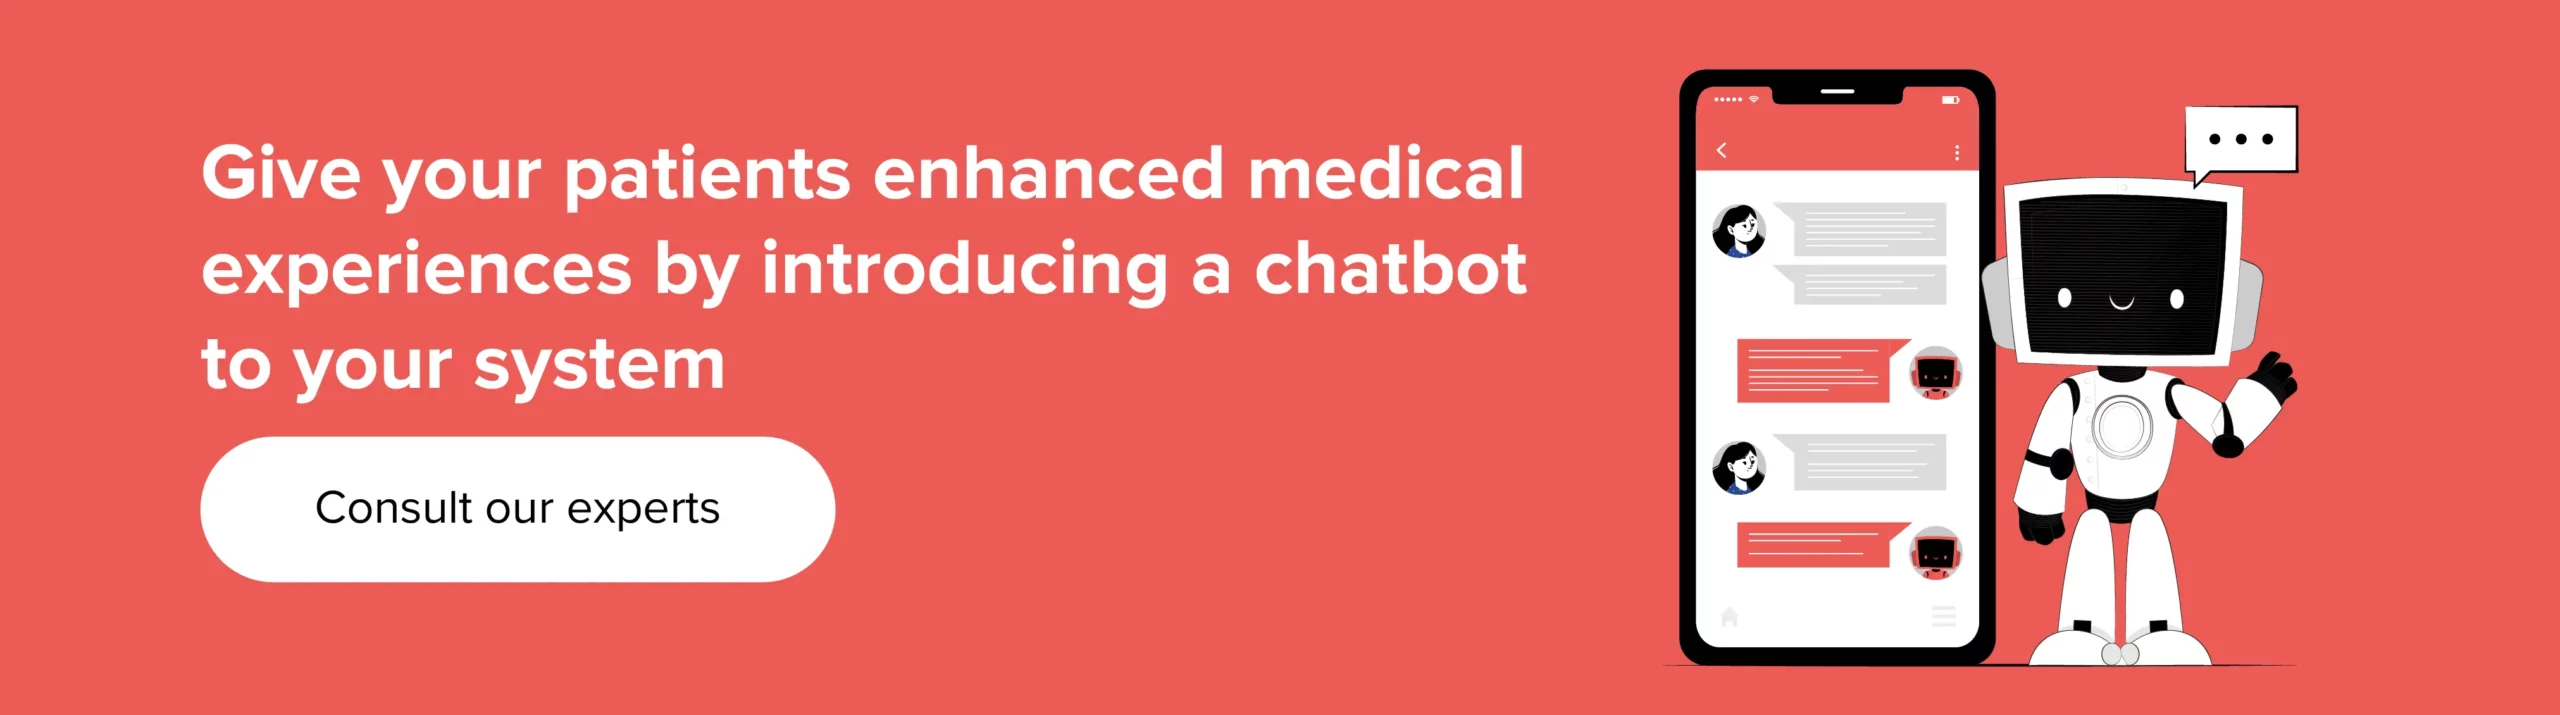 Enhanced medical experiences by introducing a chatbot to your system